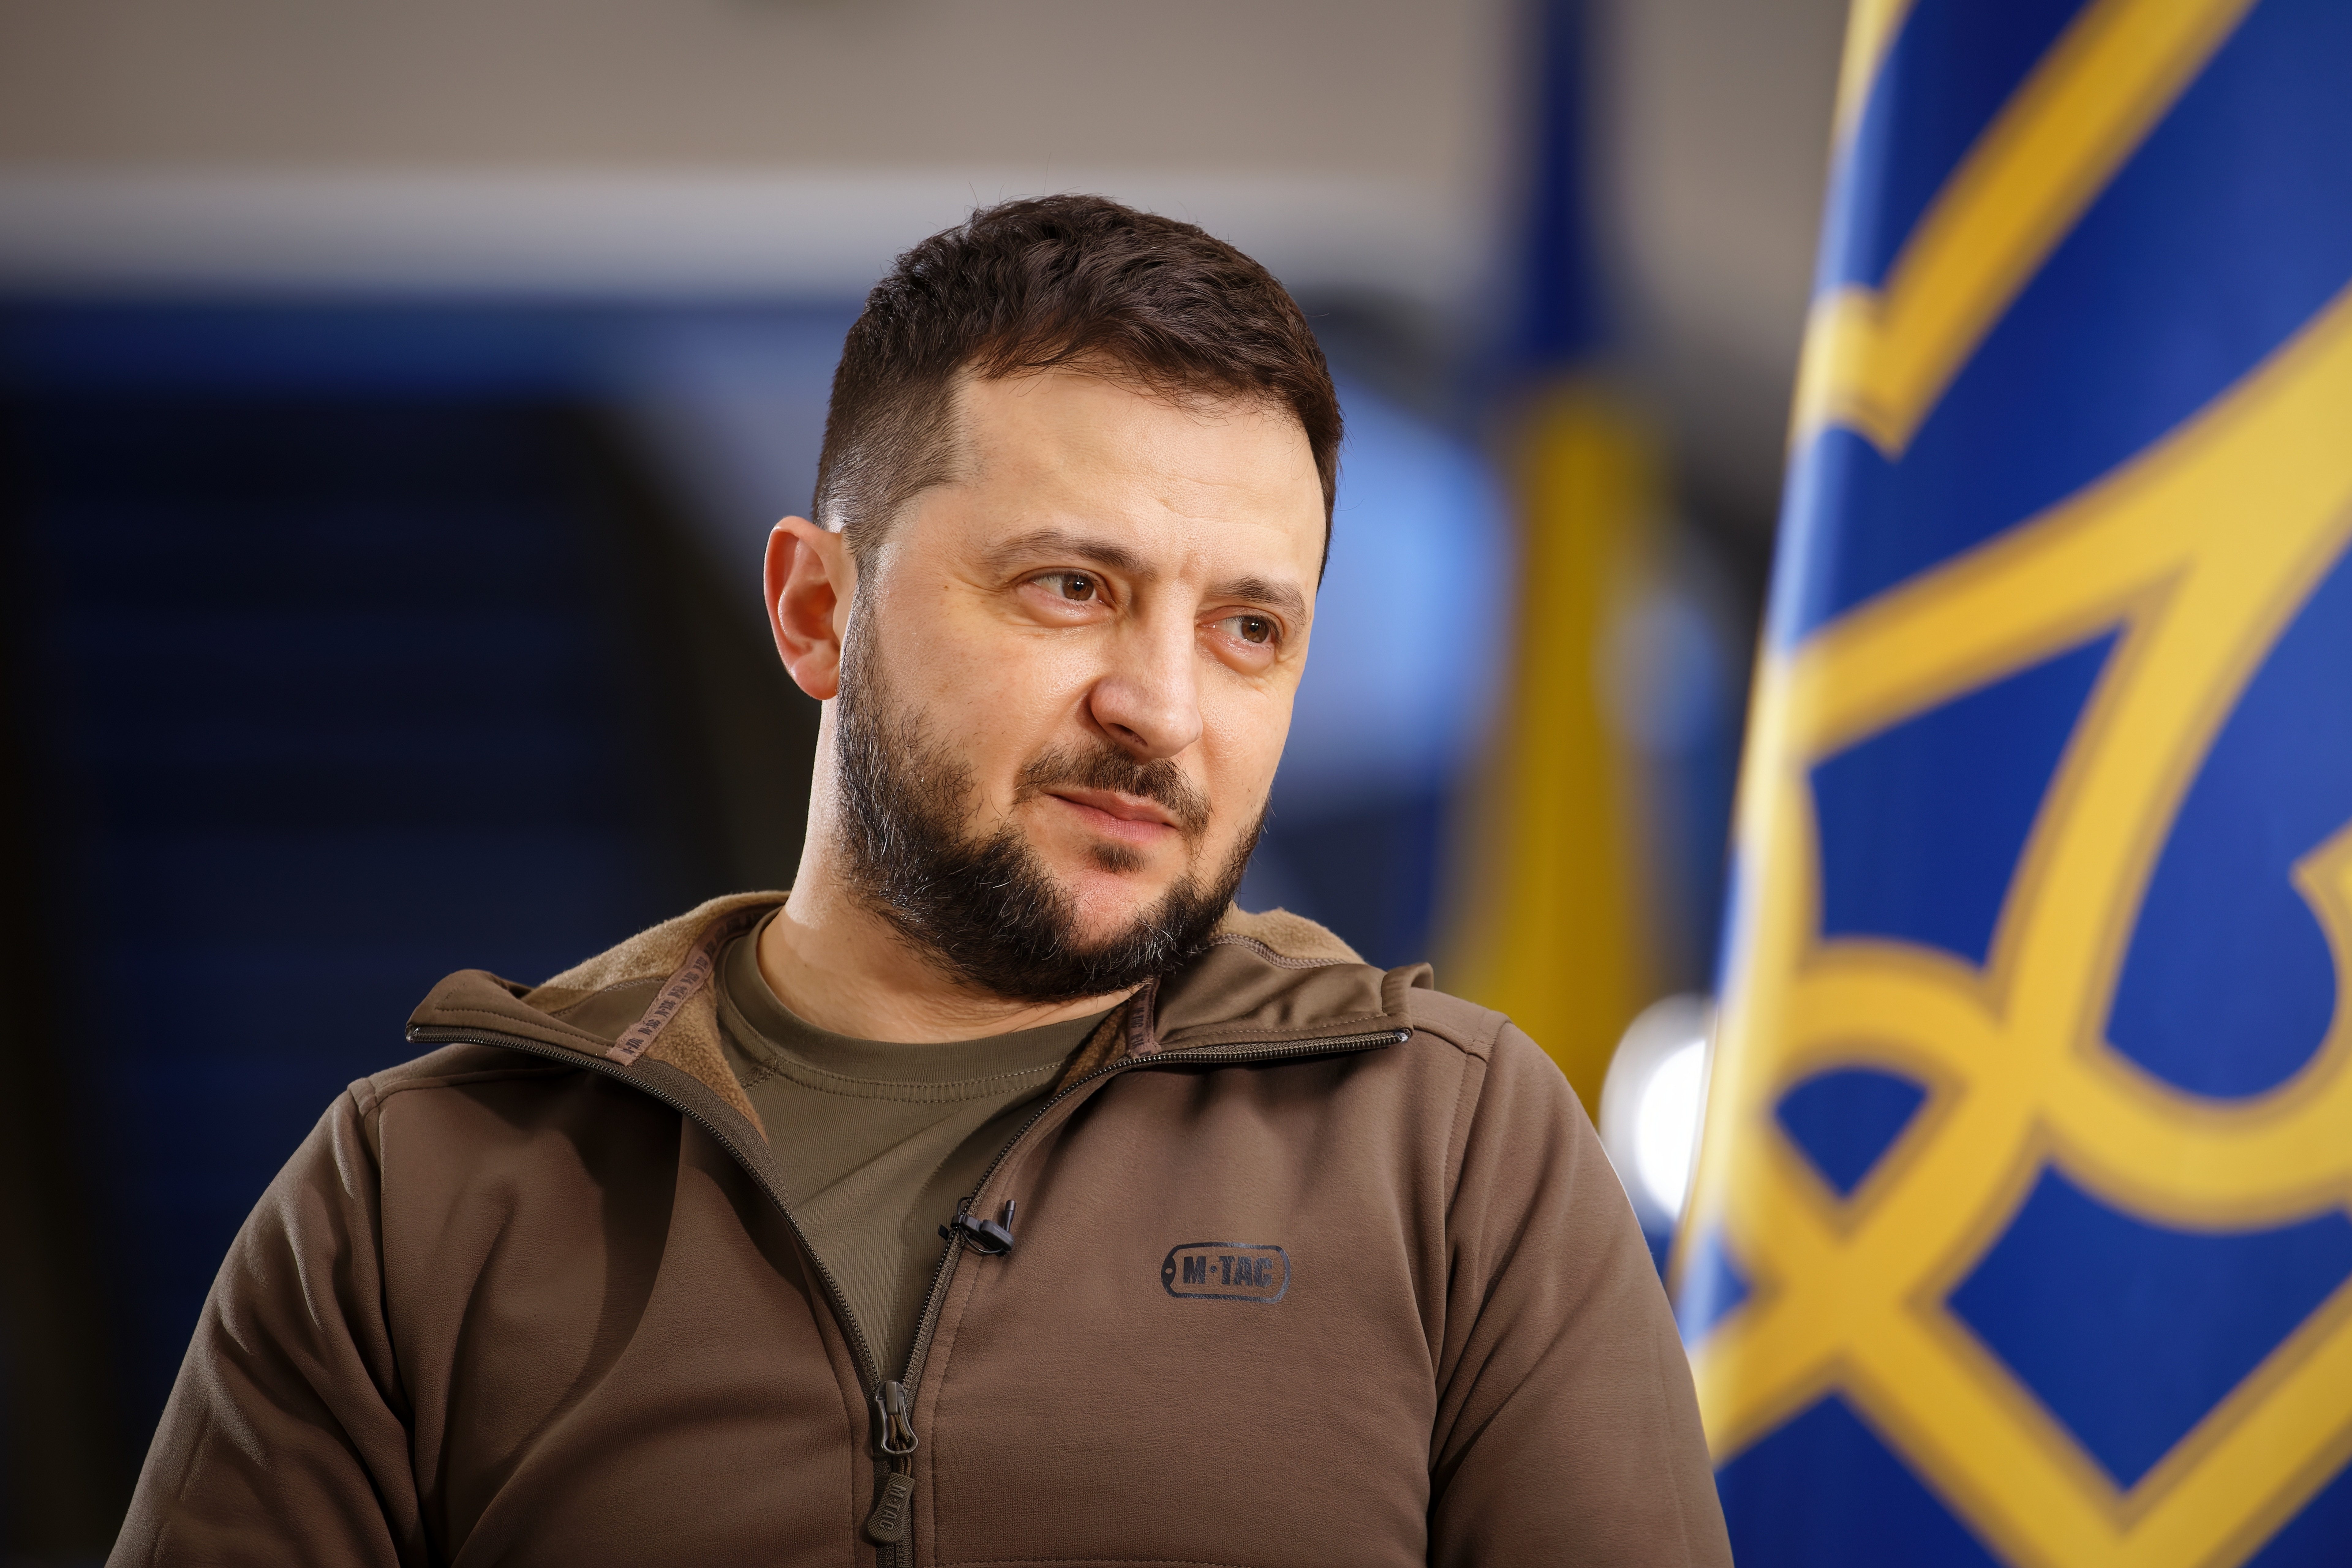 Highly Anticipated Documentary On Ukraine War And Zelenskyy To Premiere At This Film Festival